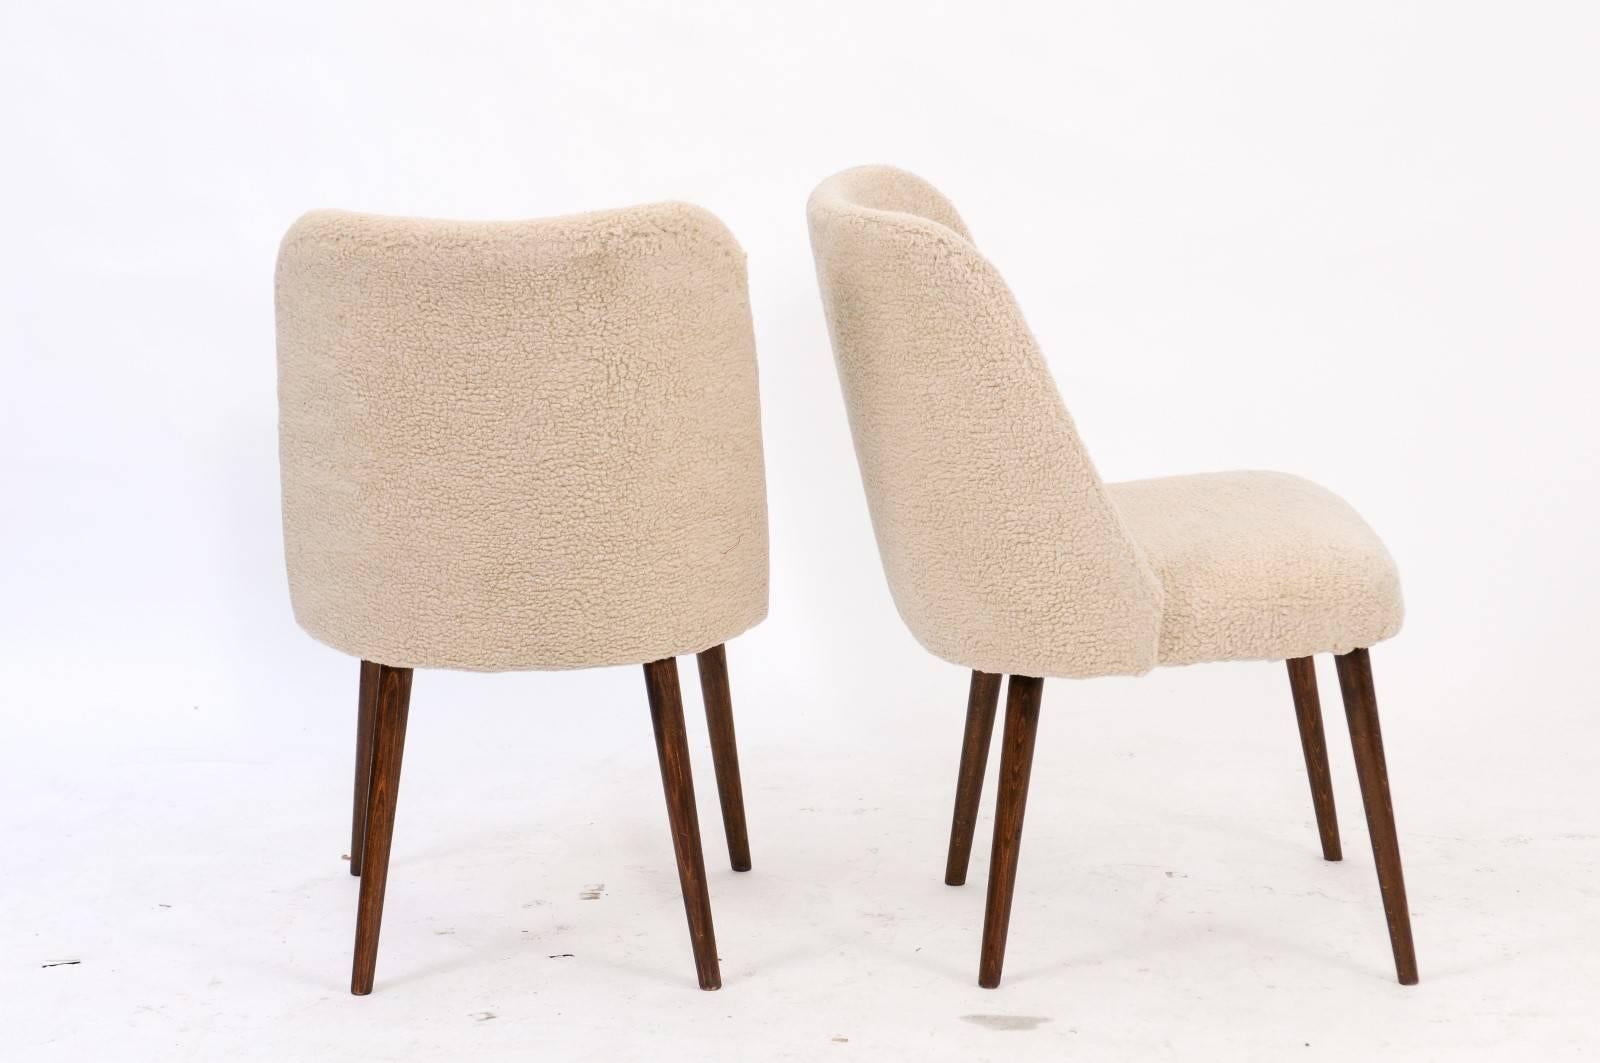 Upholstery Pair of French Mouton Upholstered Side Chairs from the Mid-Century